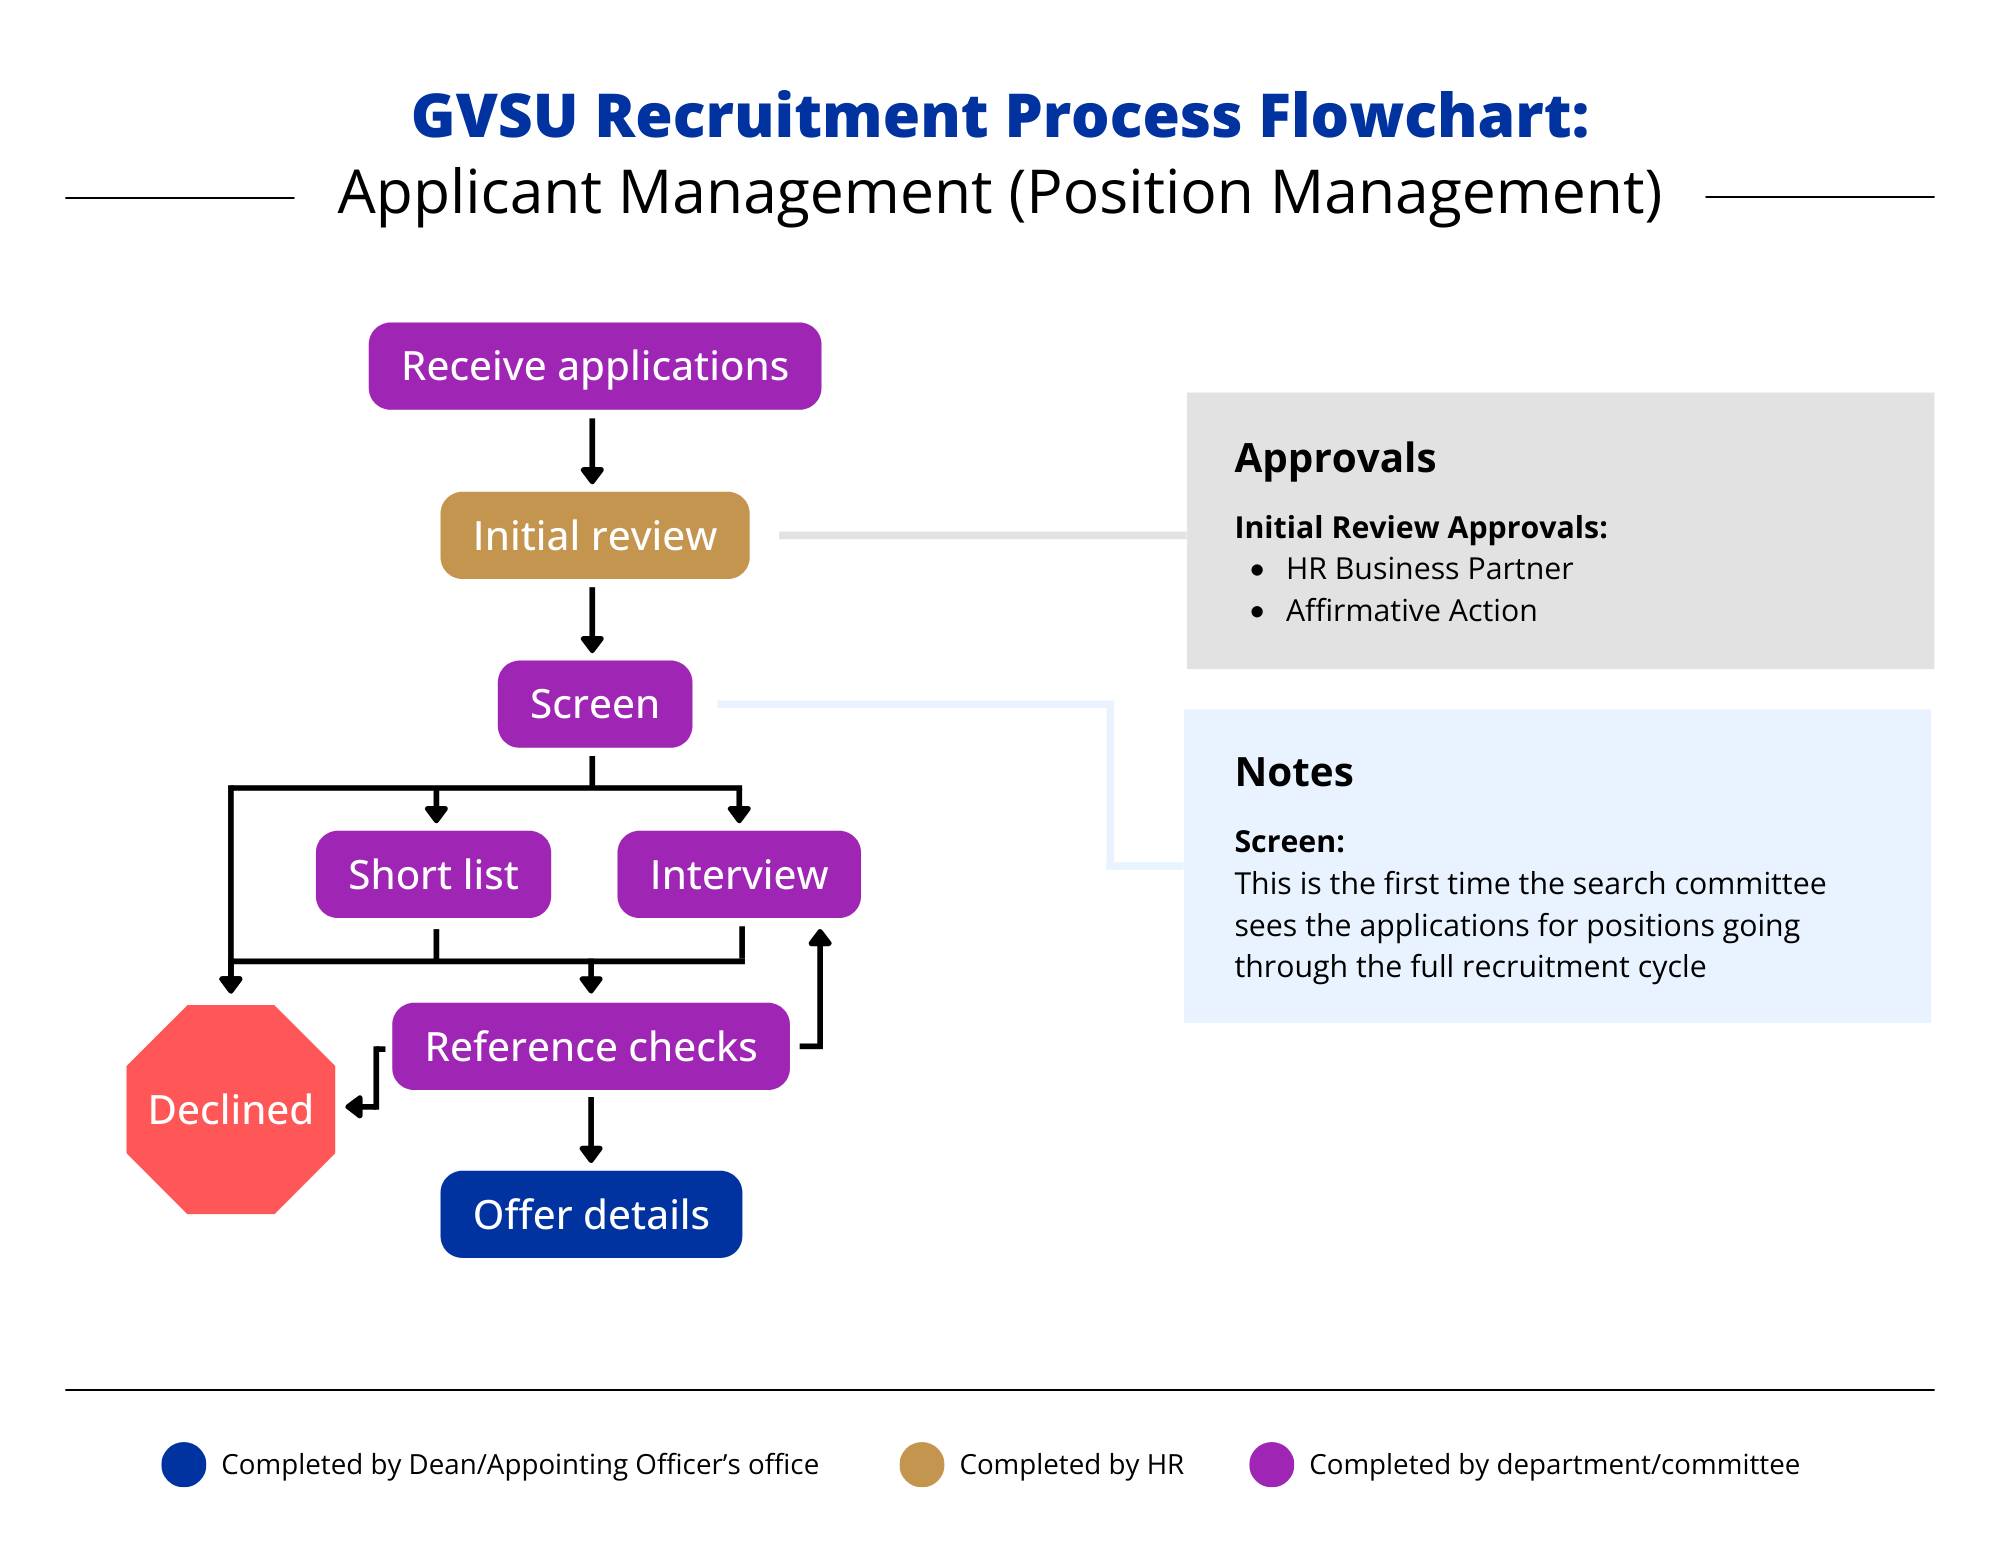 Flowchart explaining the steps within Applicant Management, stage two in the recruiting process